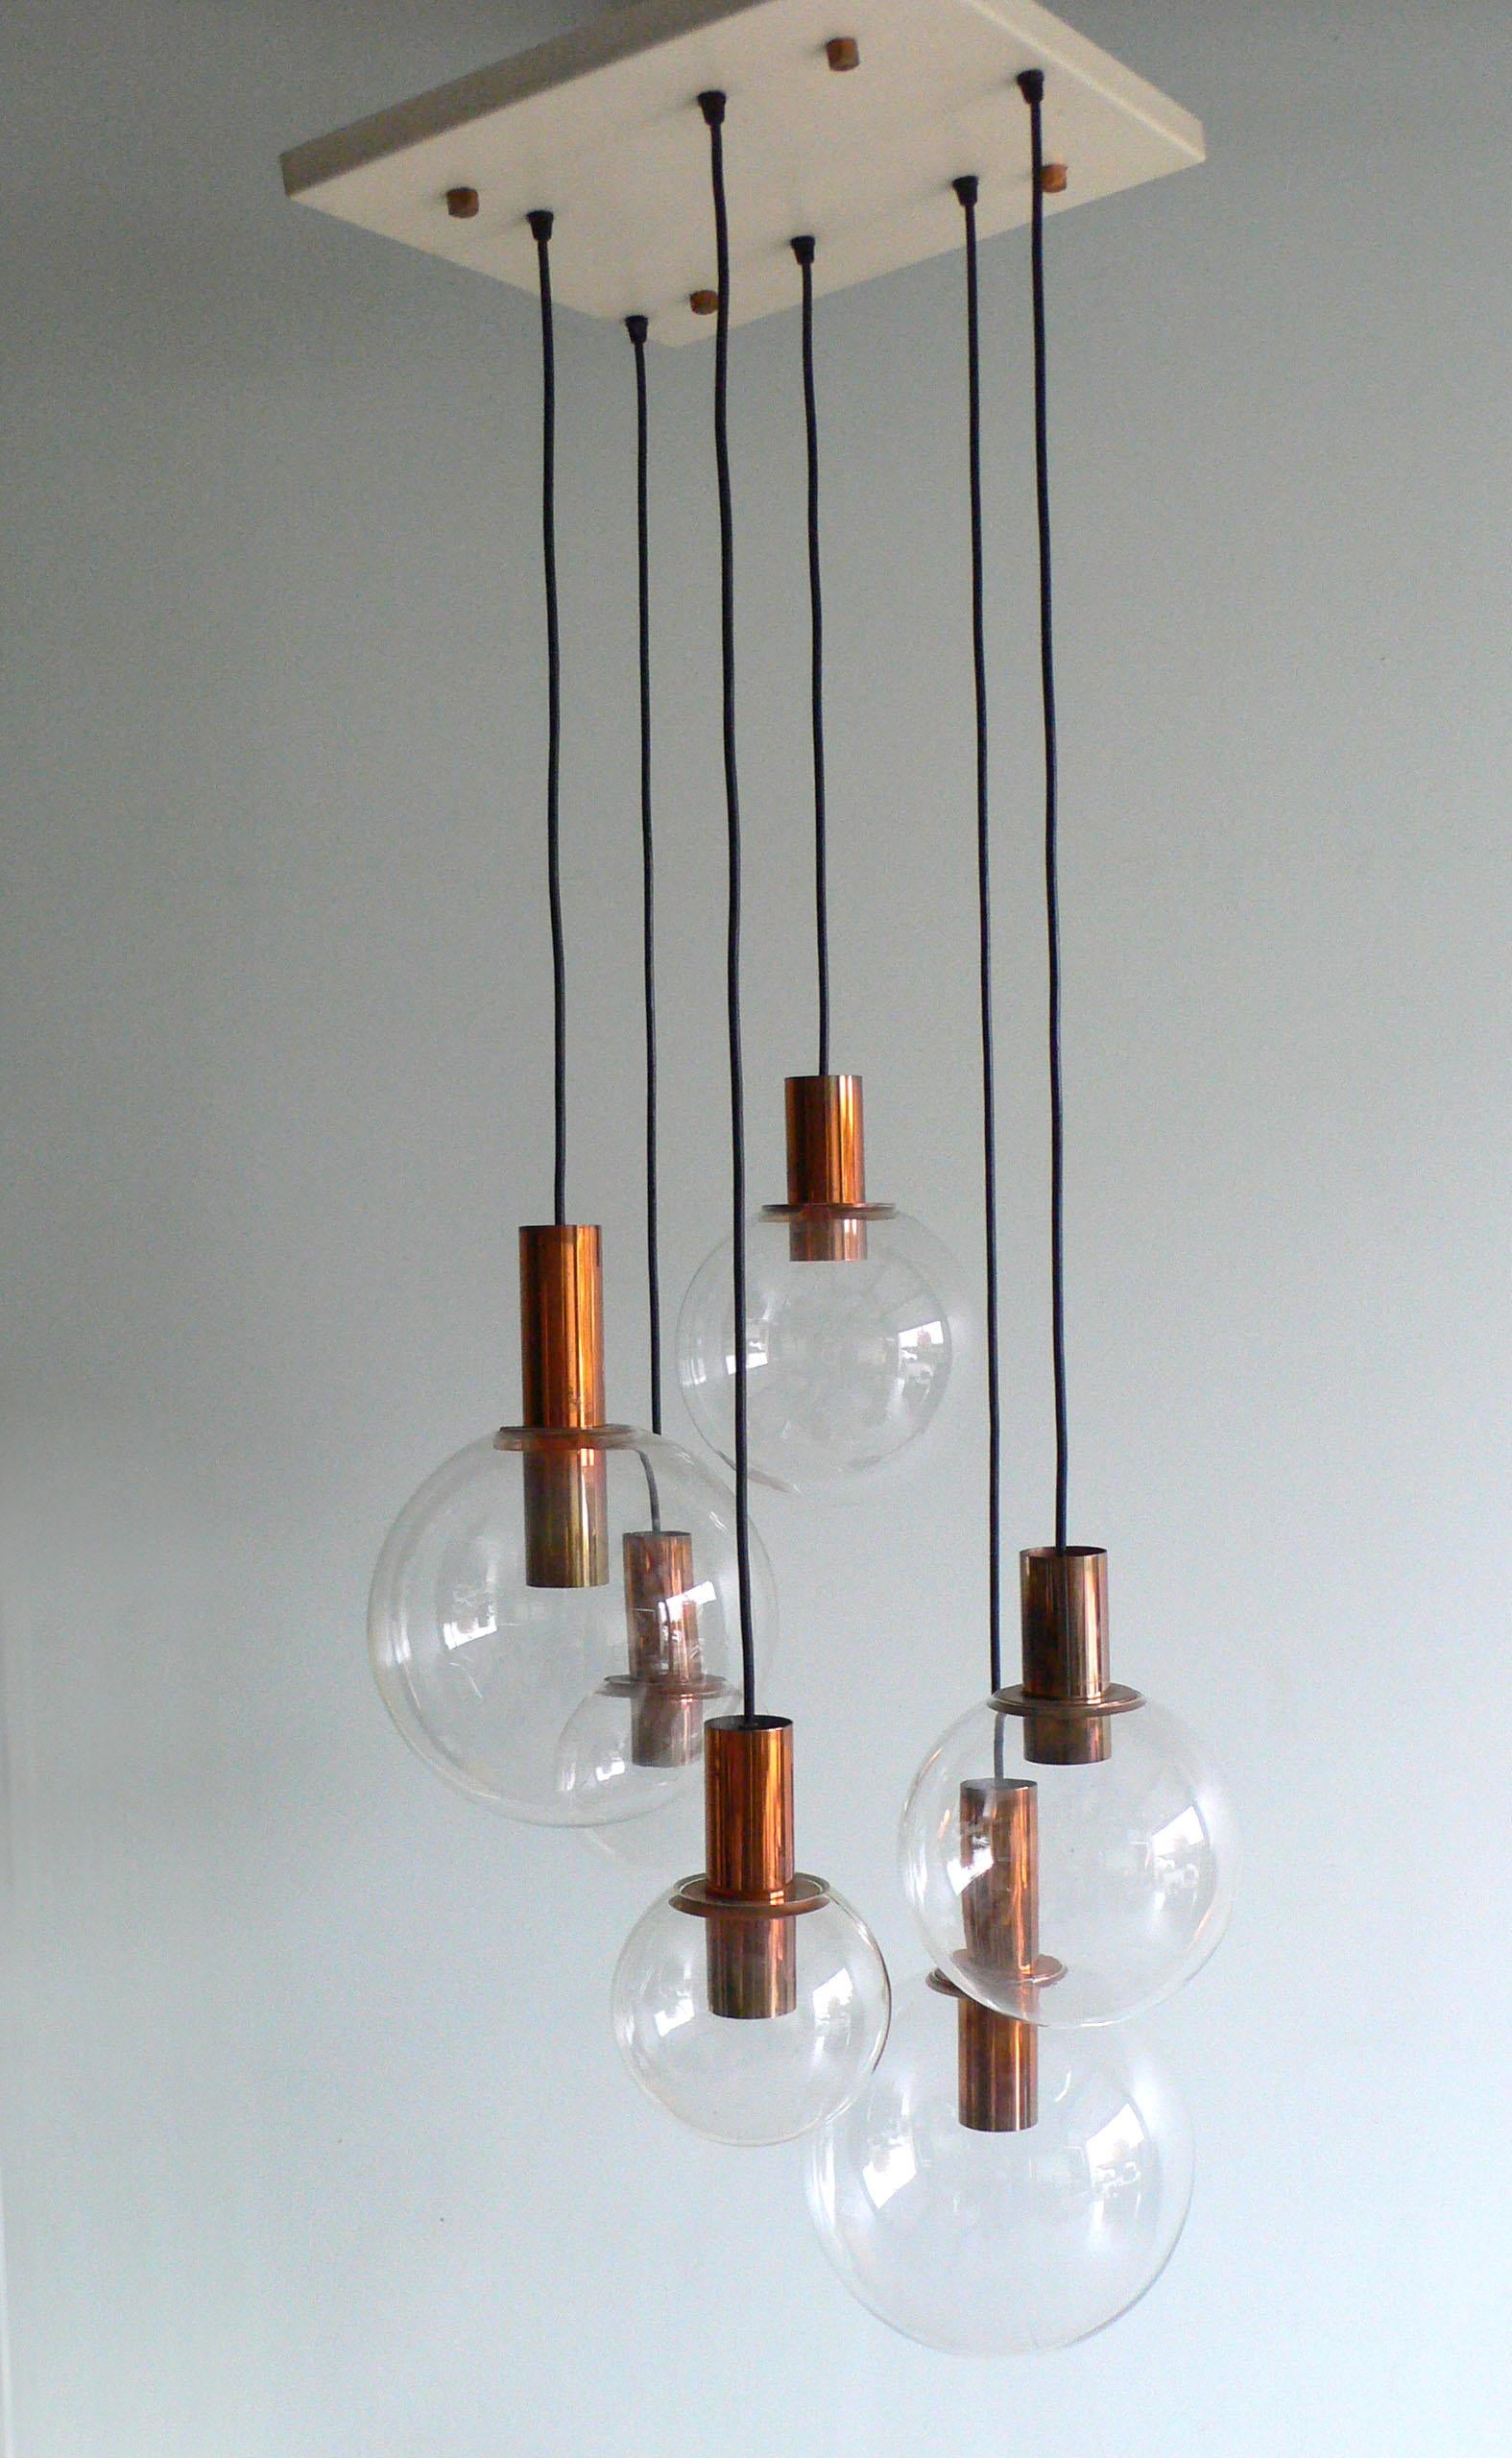 A vintage Mid-Century Modern dutch late 1960's Design Copper & Glass large pendant hanging lamp Chandelier with 6 glass balls. Made in Holland in the late 1960's, early 1970's. Attributed to RAAK, Amsterdam. Constructed with glass balls and all